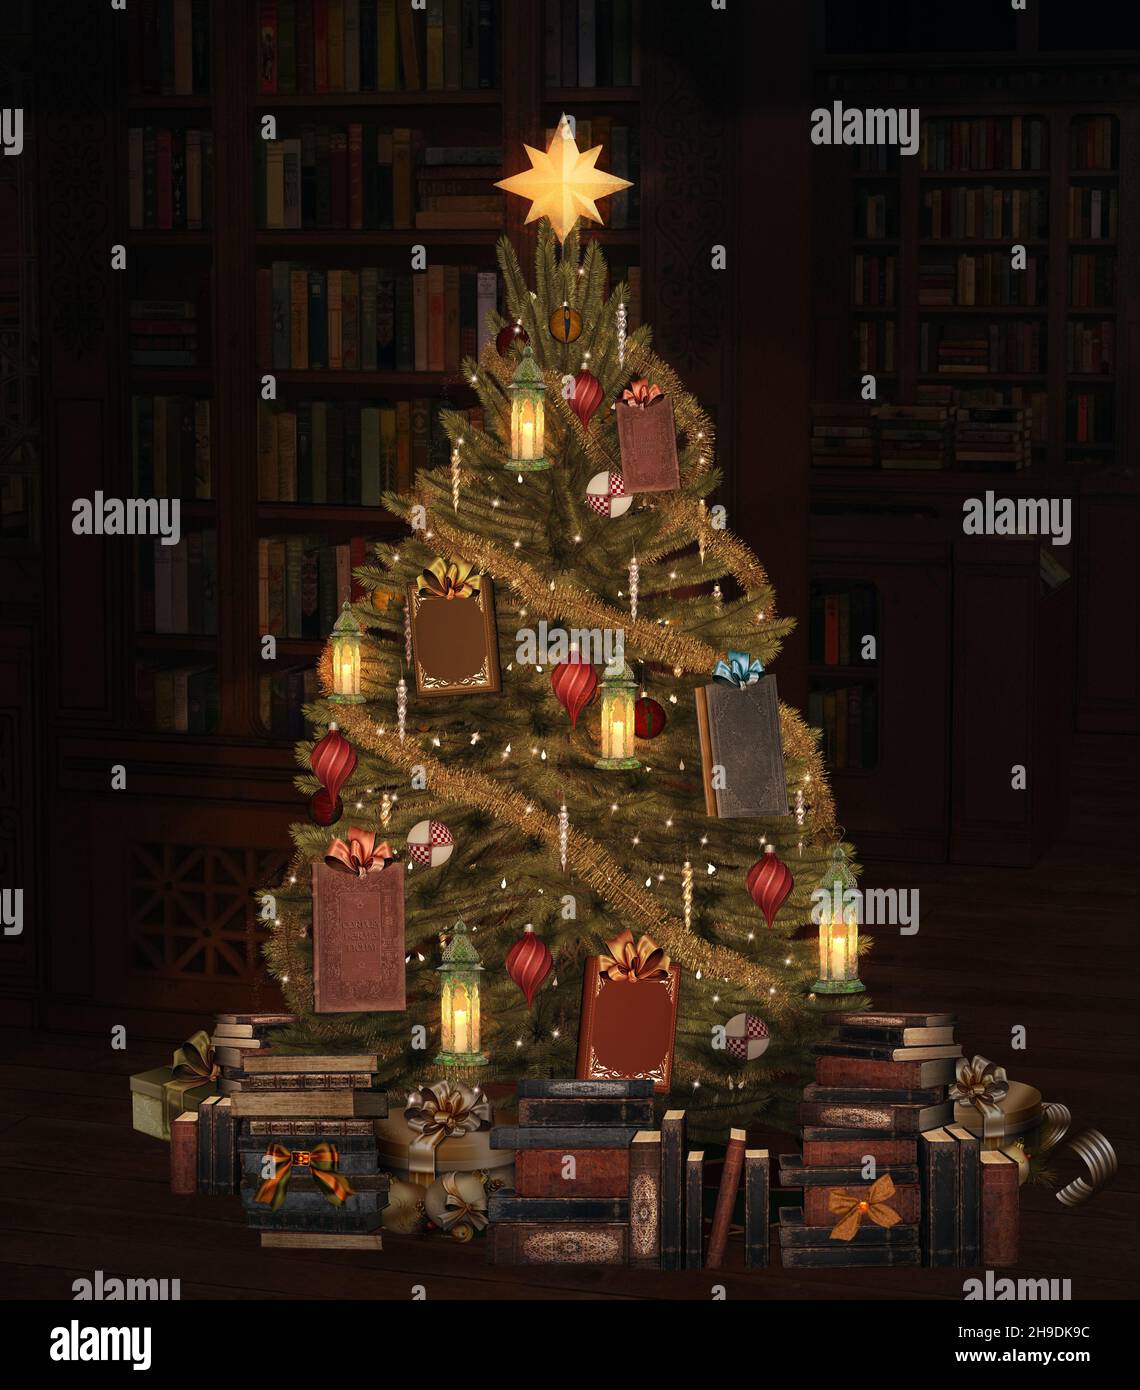 Fully decorated christmas tree by a library with plenty of books as useful gifts Stock Photo